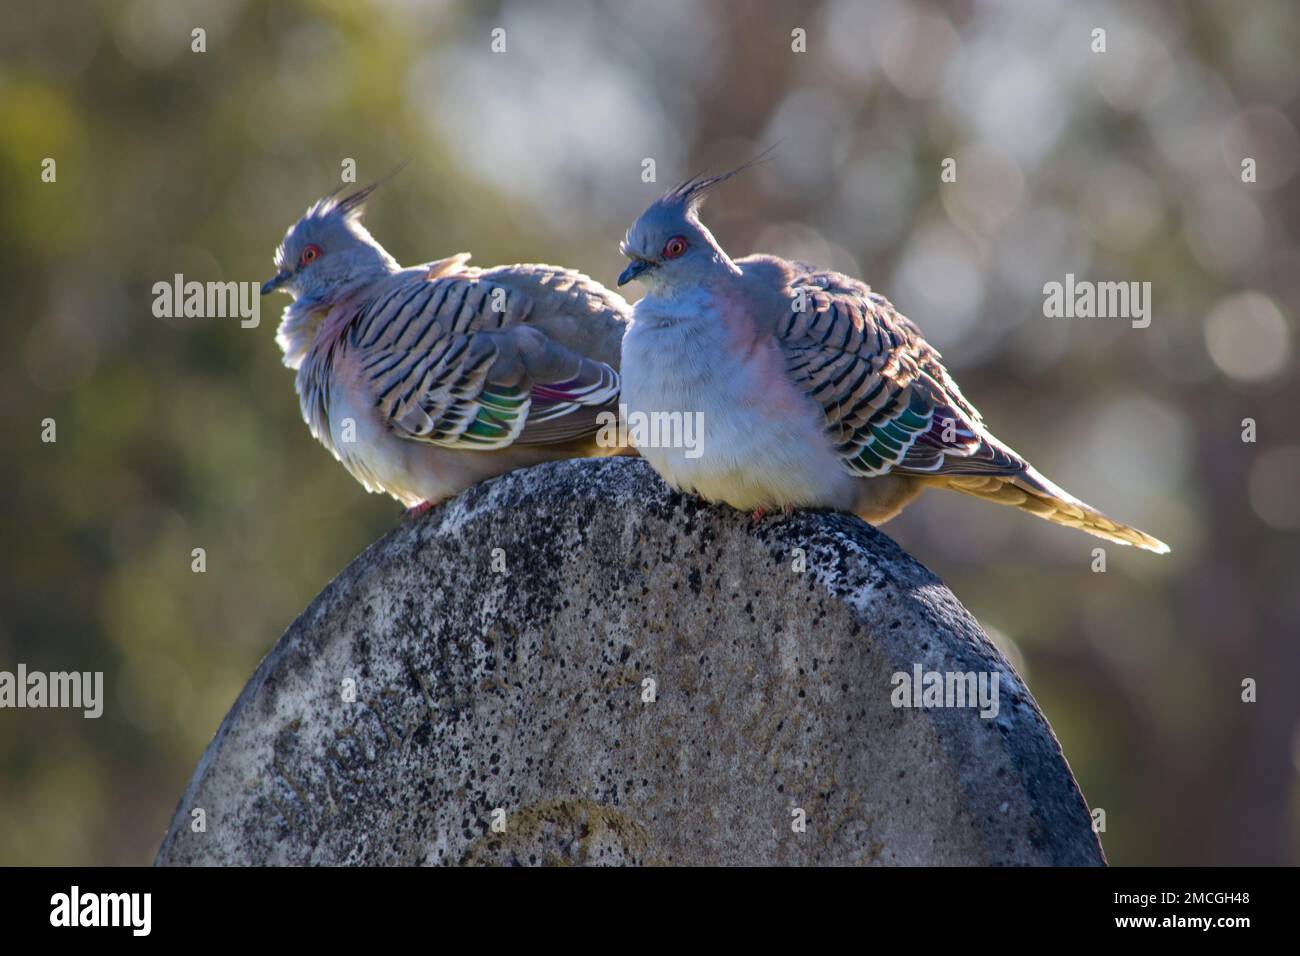 A pair of Australian crested pigeons (Ocyphaps lophotes) perched together Stock Photo